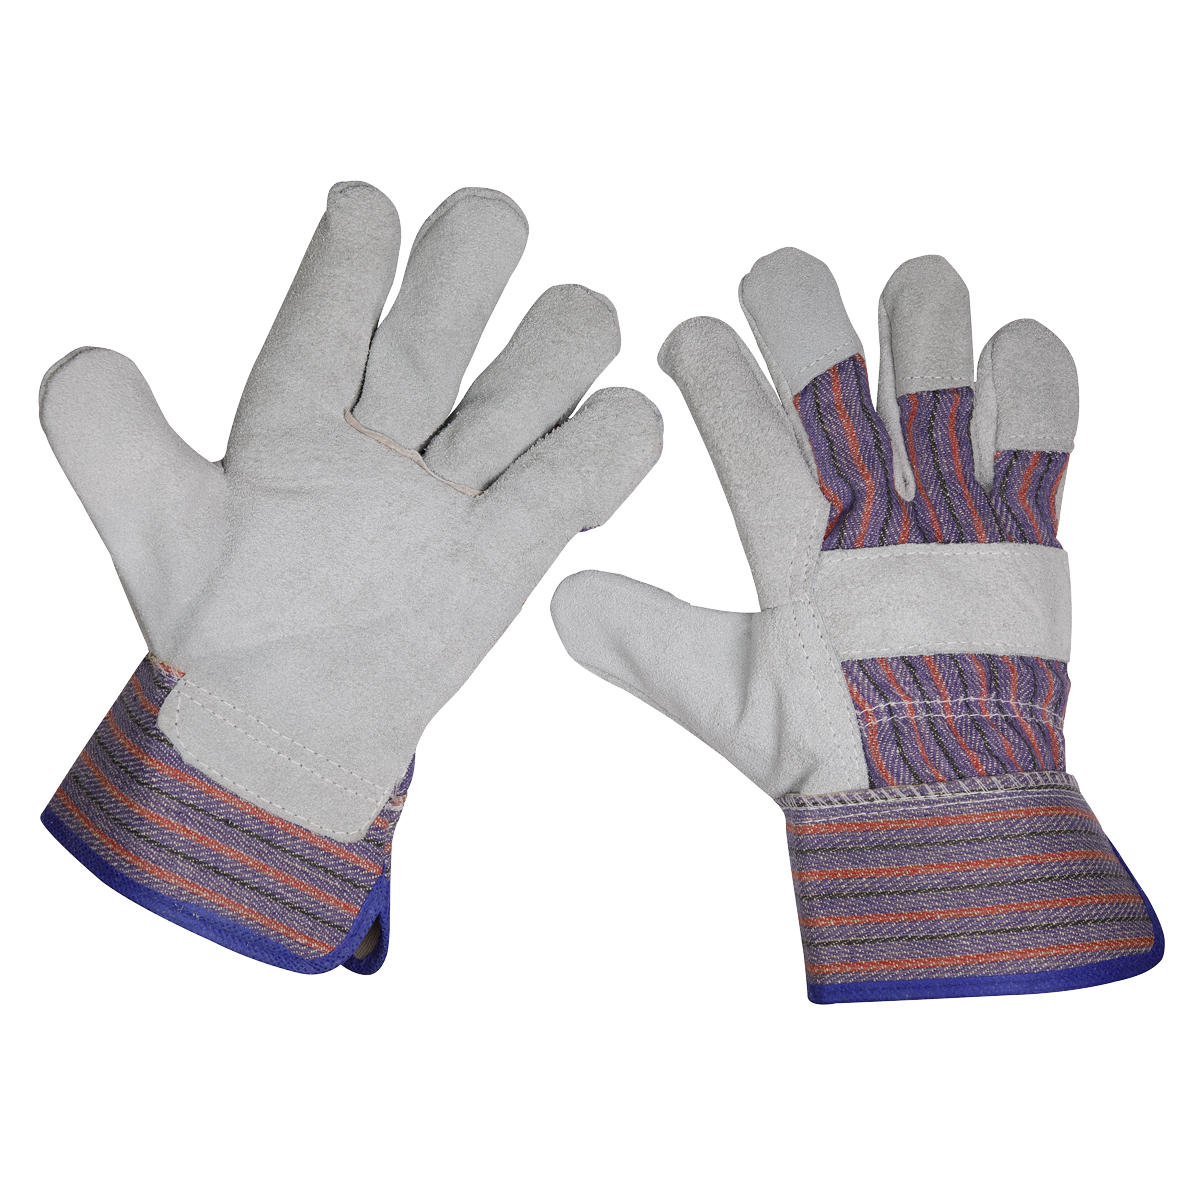 Rigger's Gloves - Pack of 6 Pairs